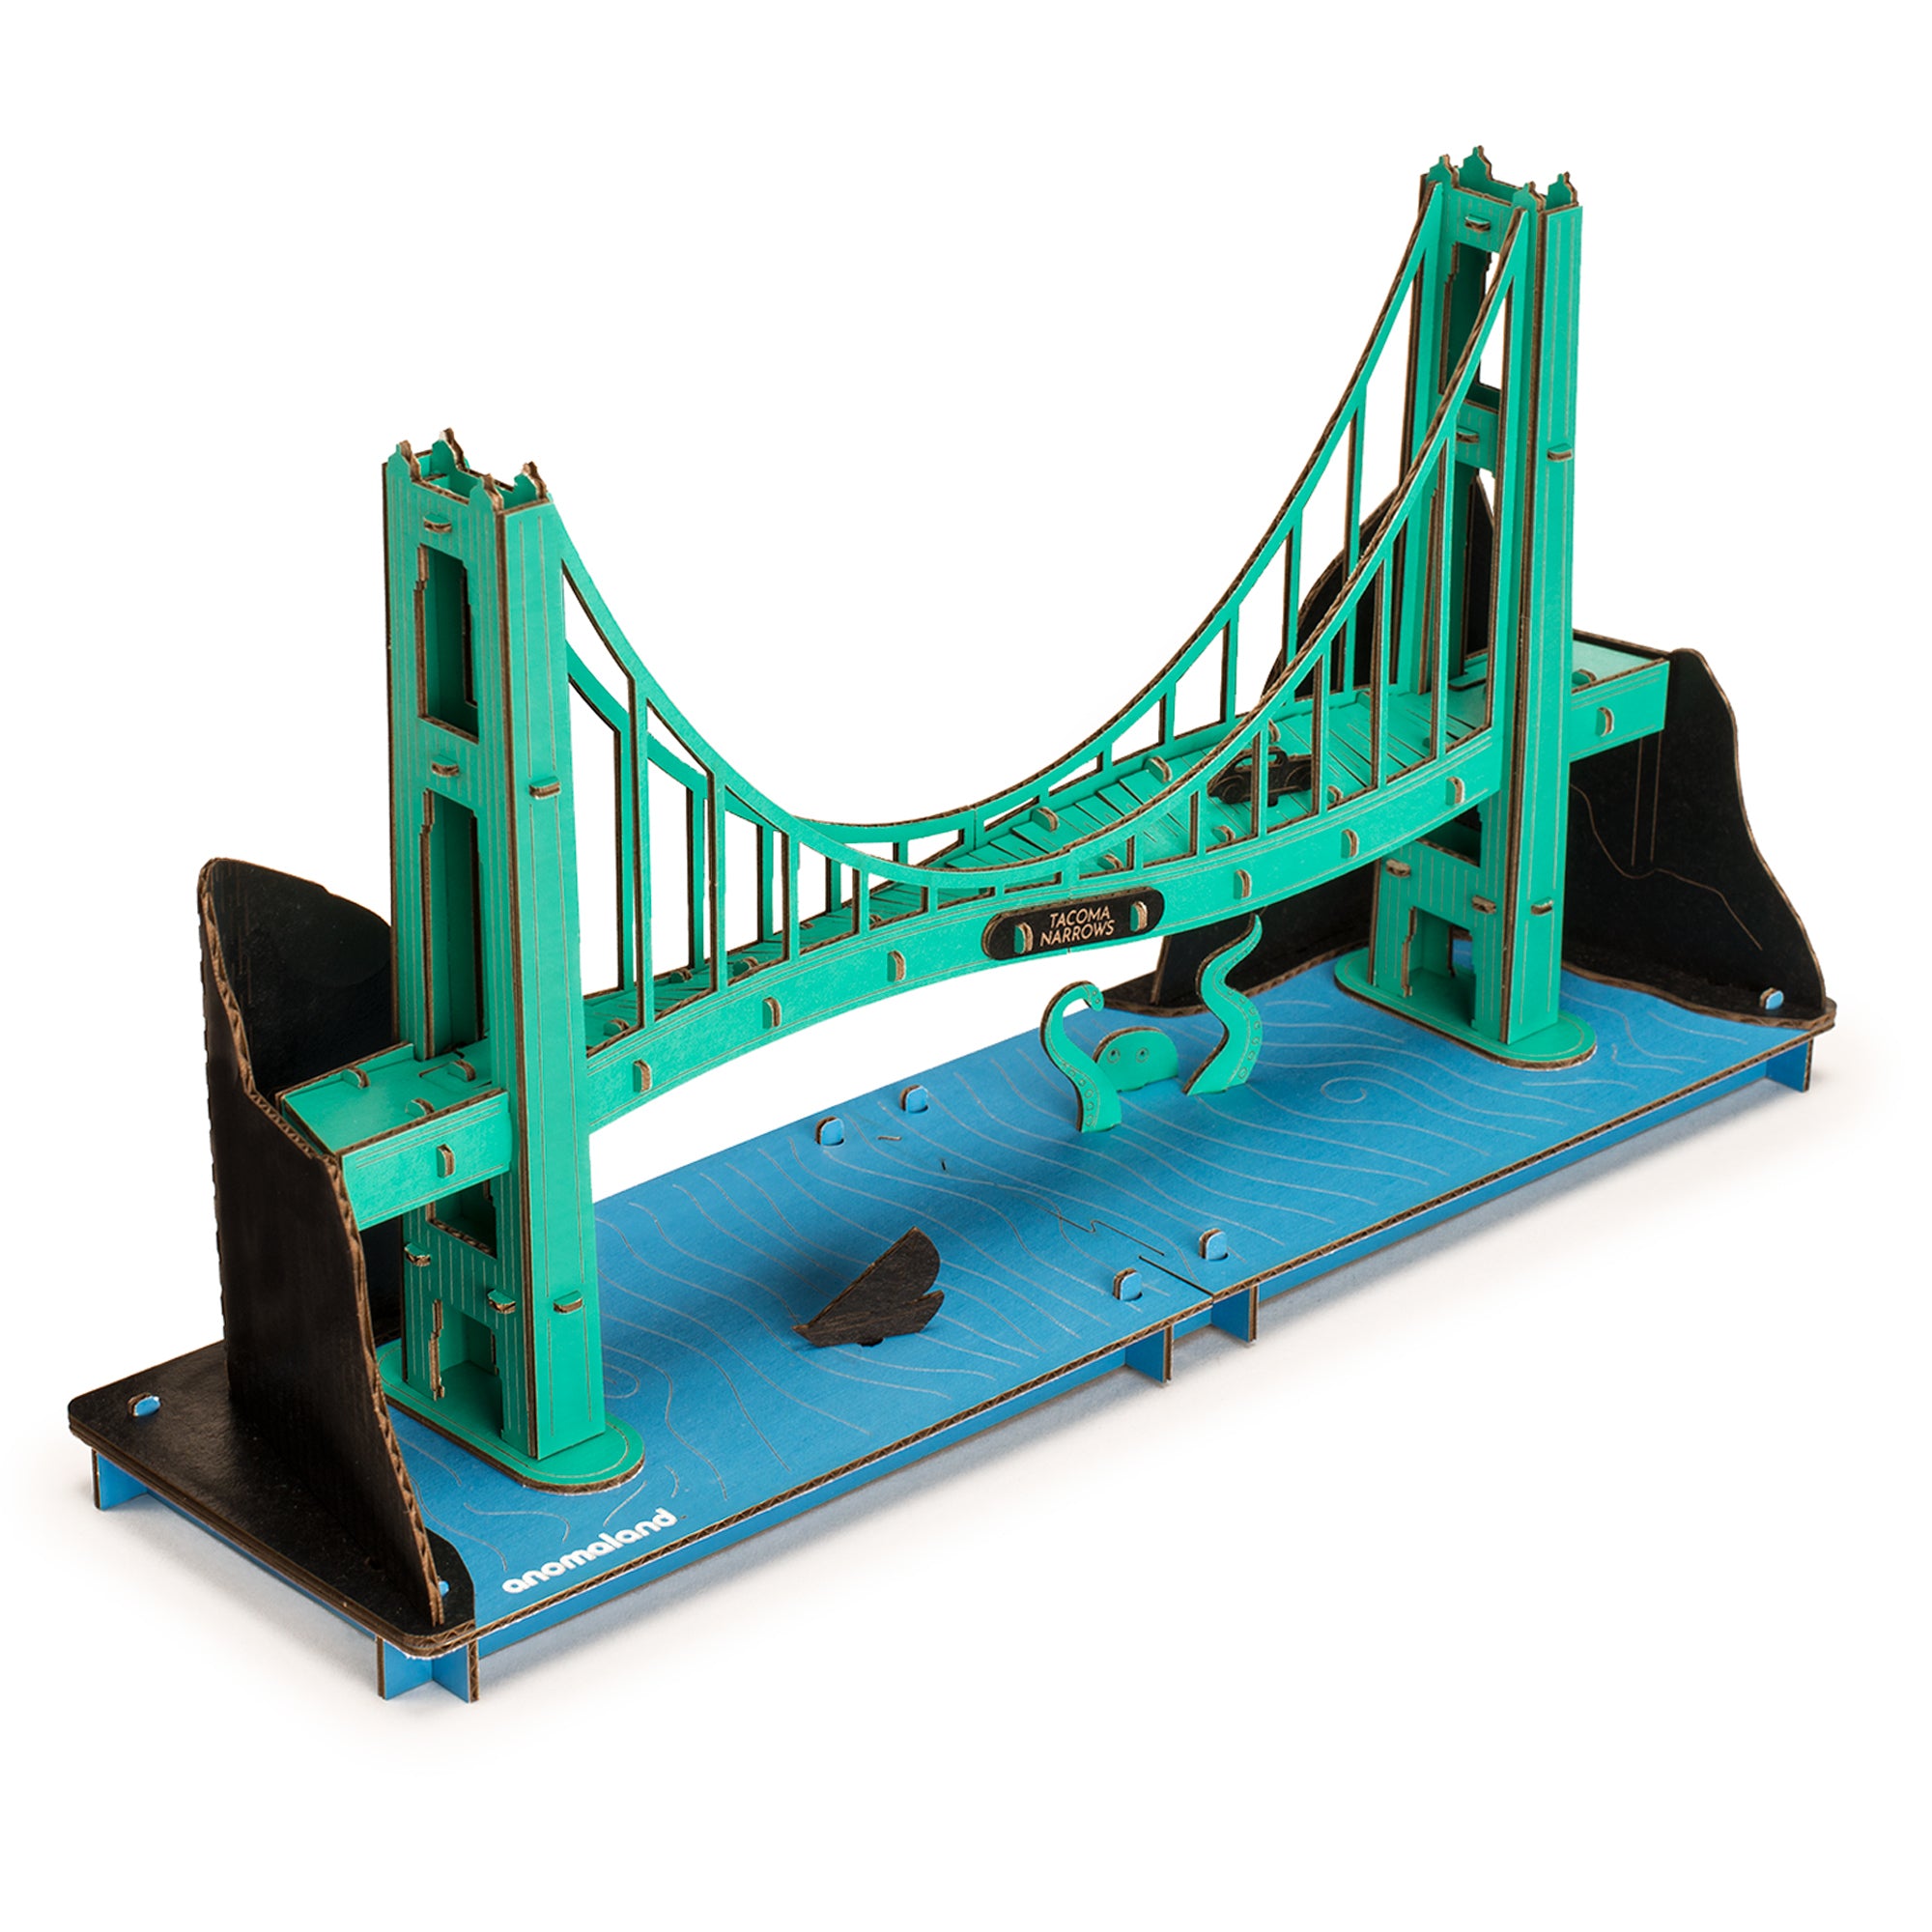 Anomaland Tacoma Narrows 1940 Bridge Cardboard Model Kit - assembled. Green twisting bridge on a base of blue water with black hills in the background.